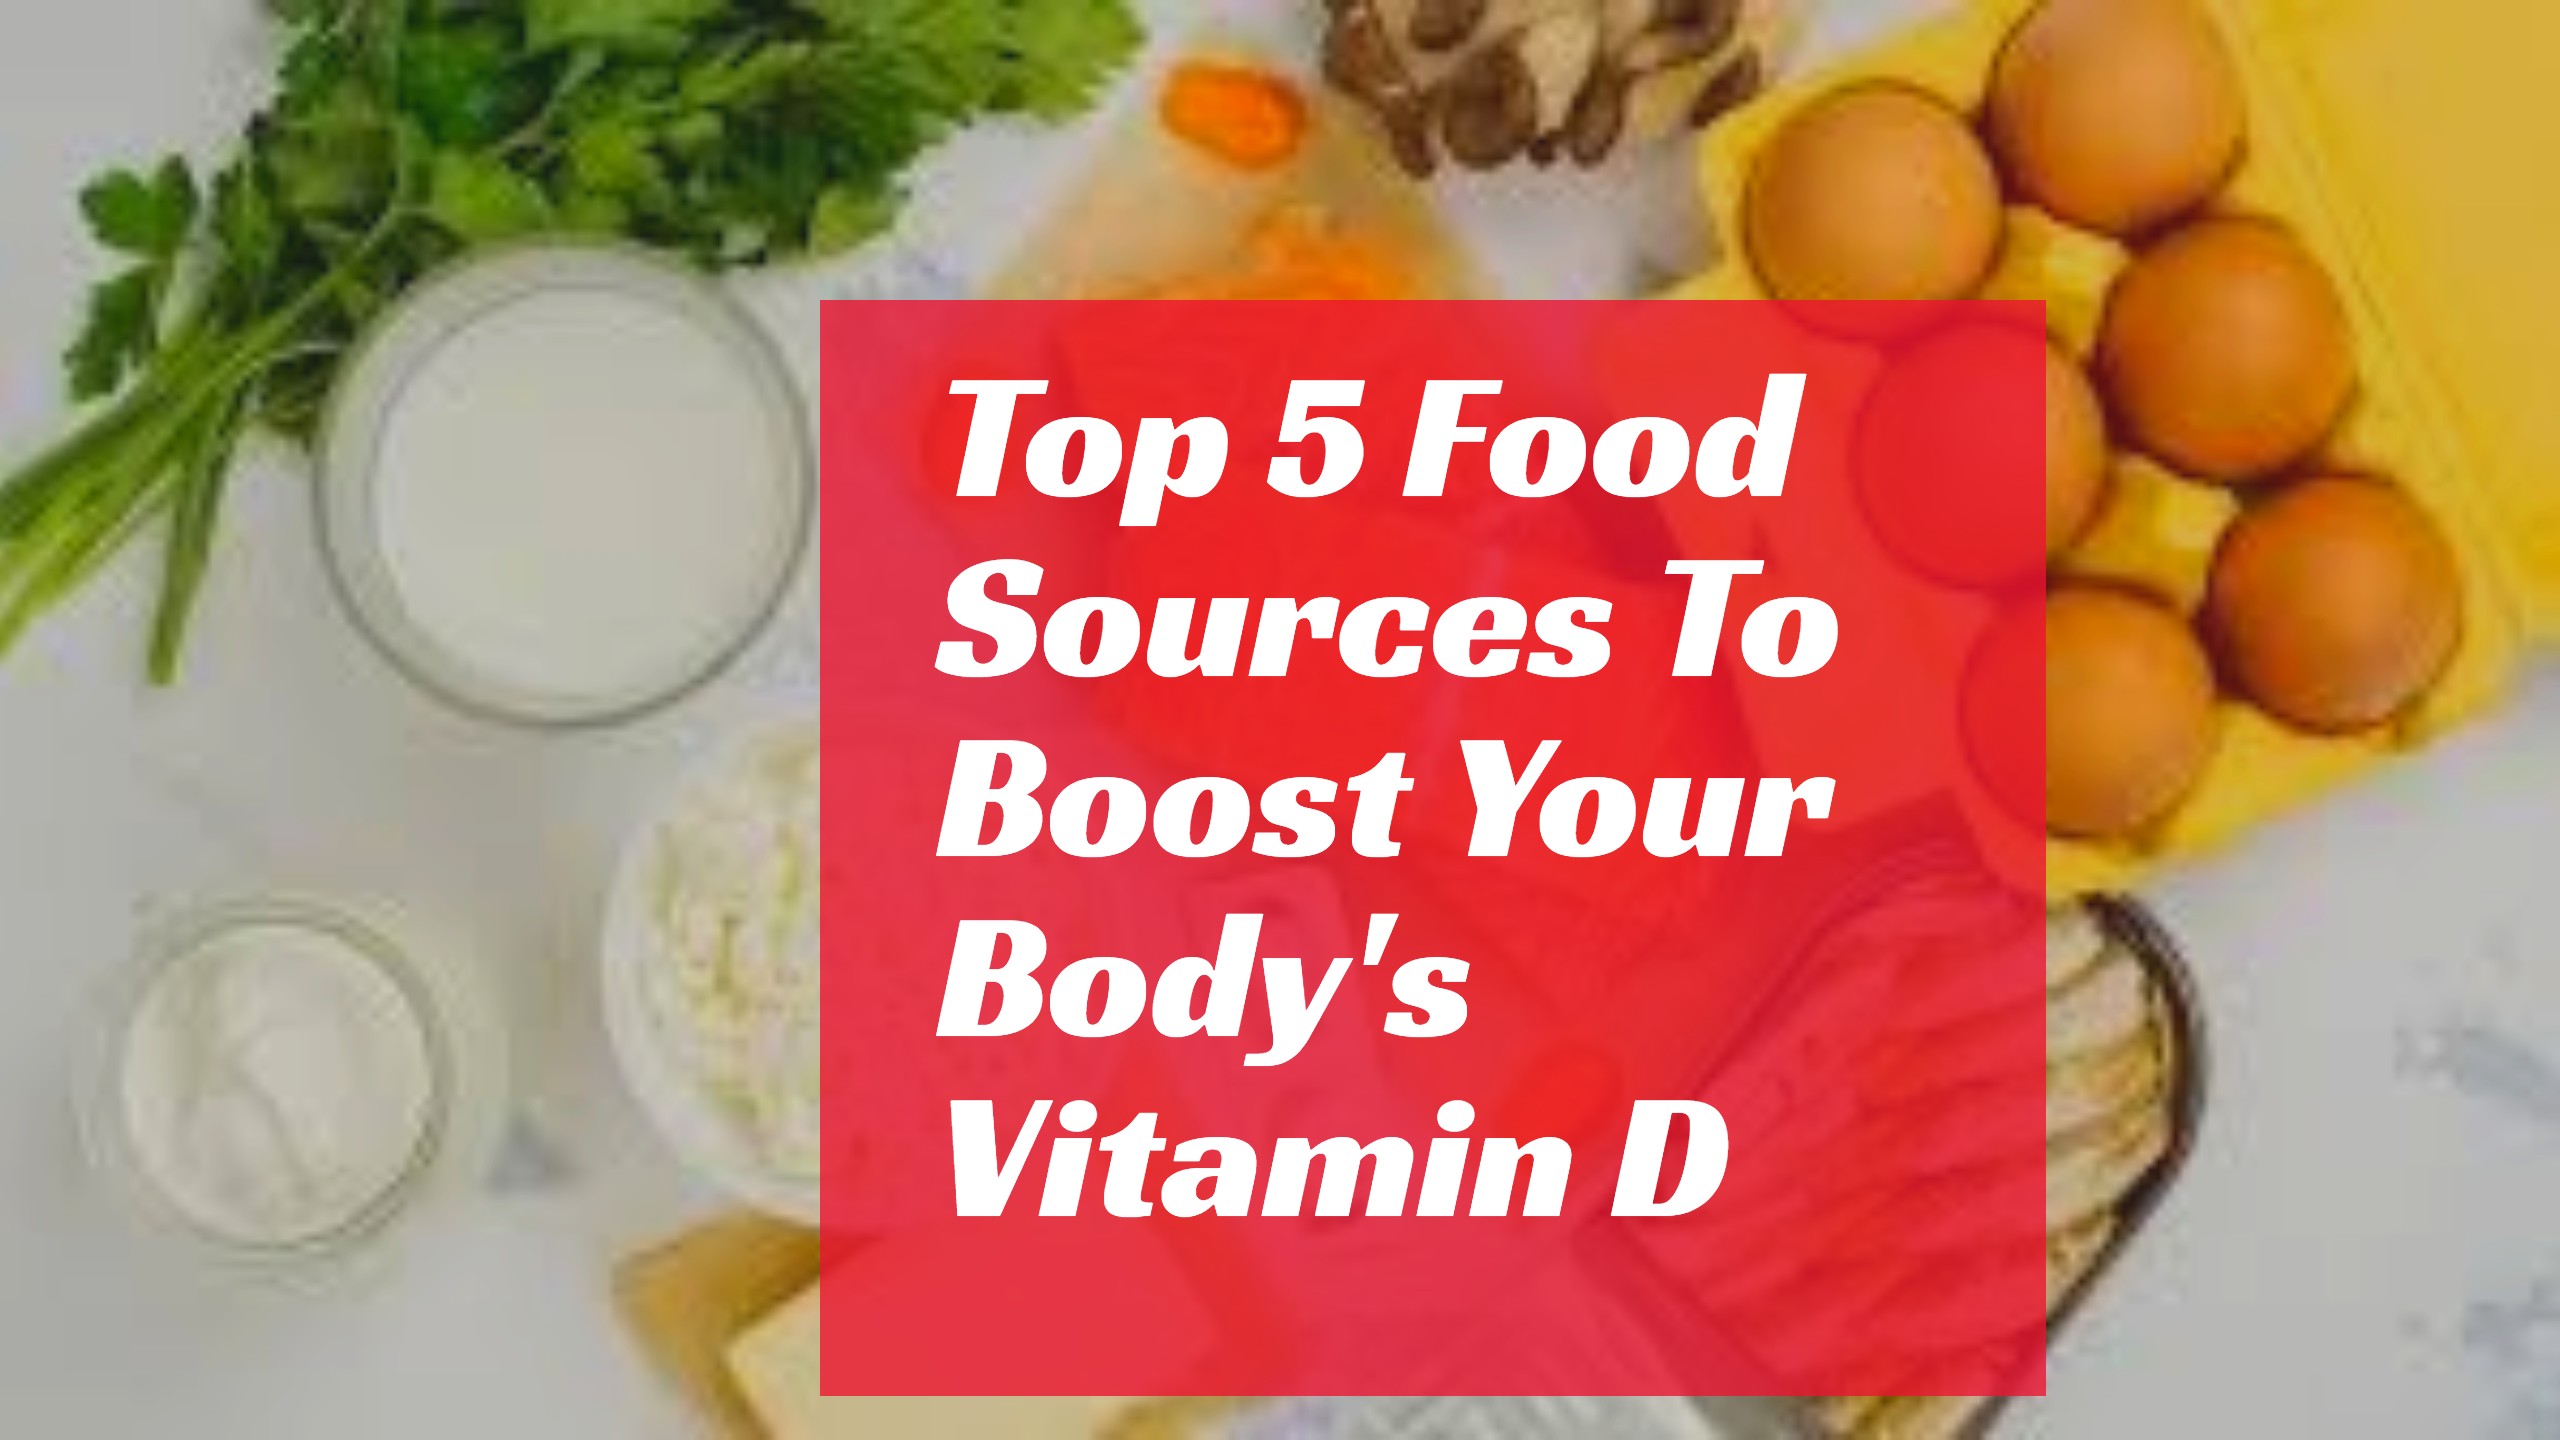 Top 5 Food Sources To Boost Your Body’s Vitamin D